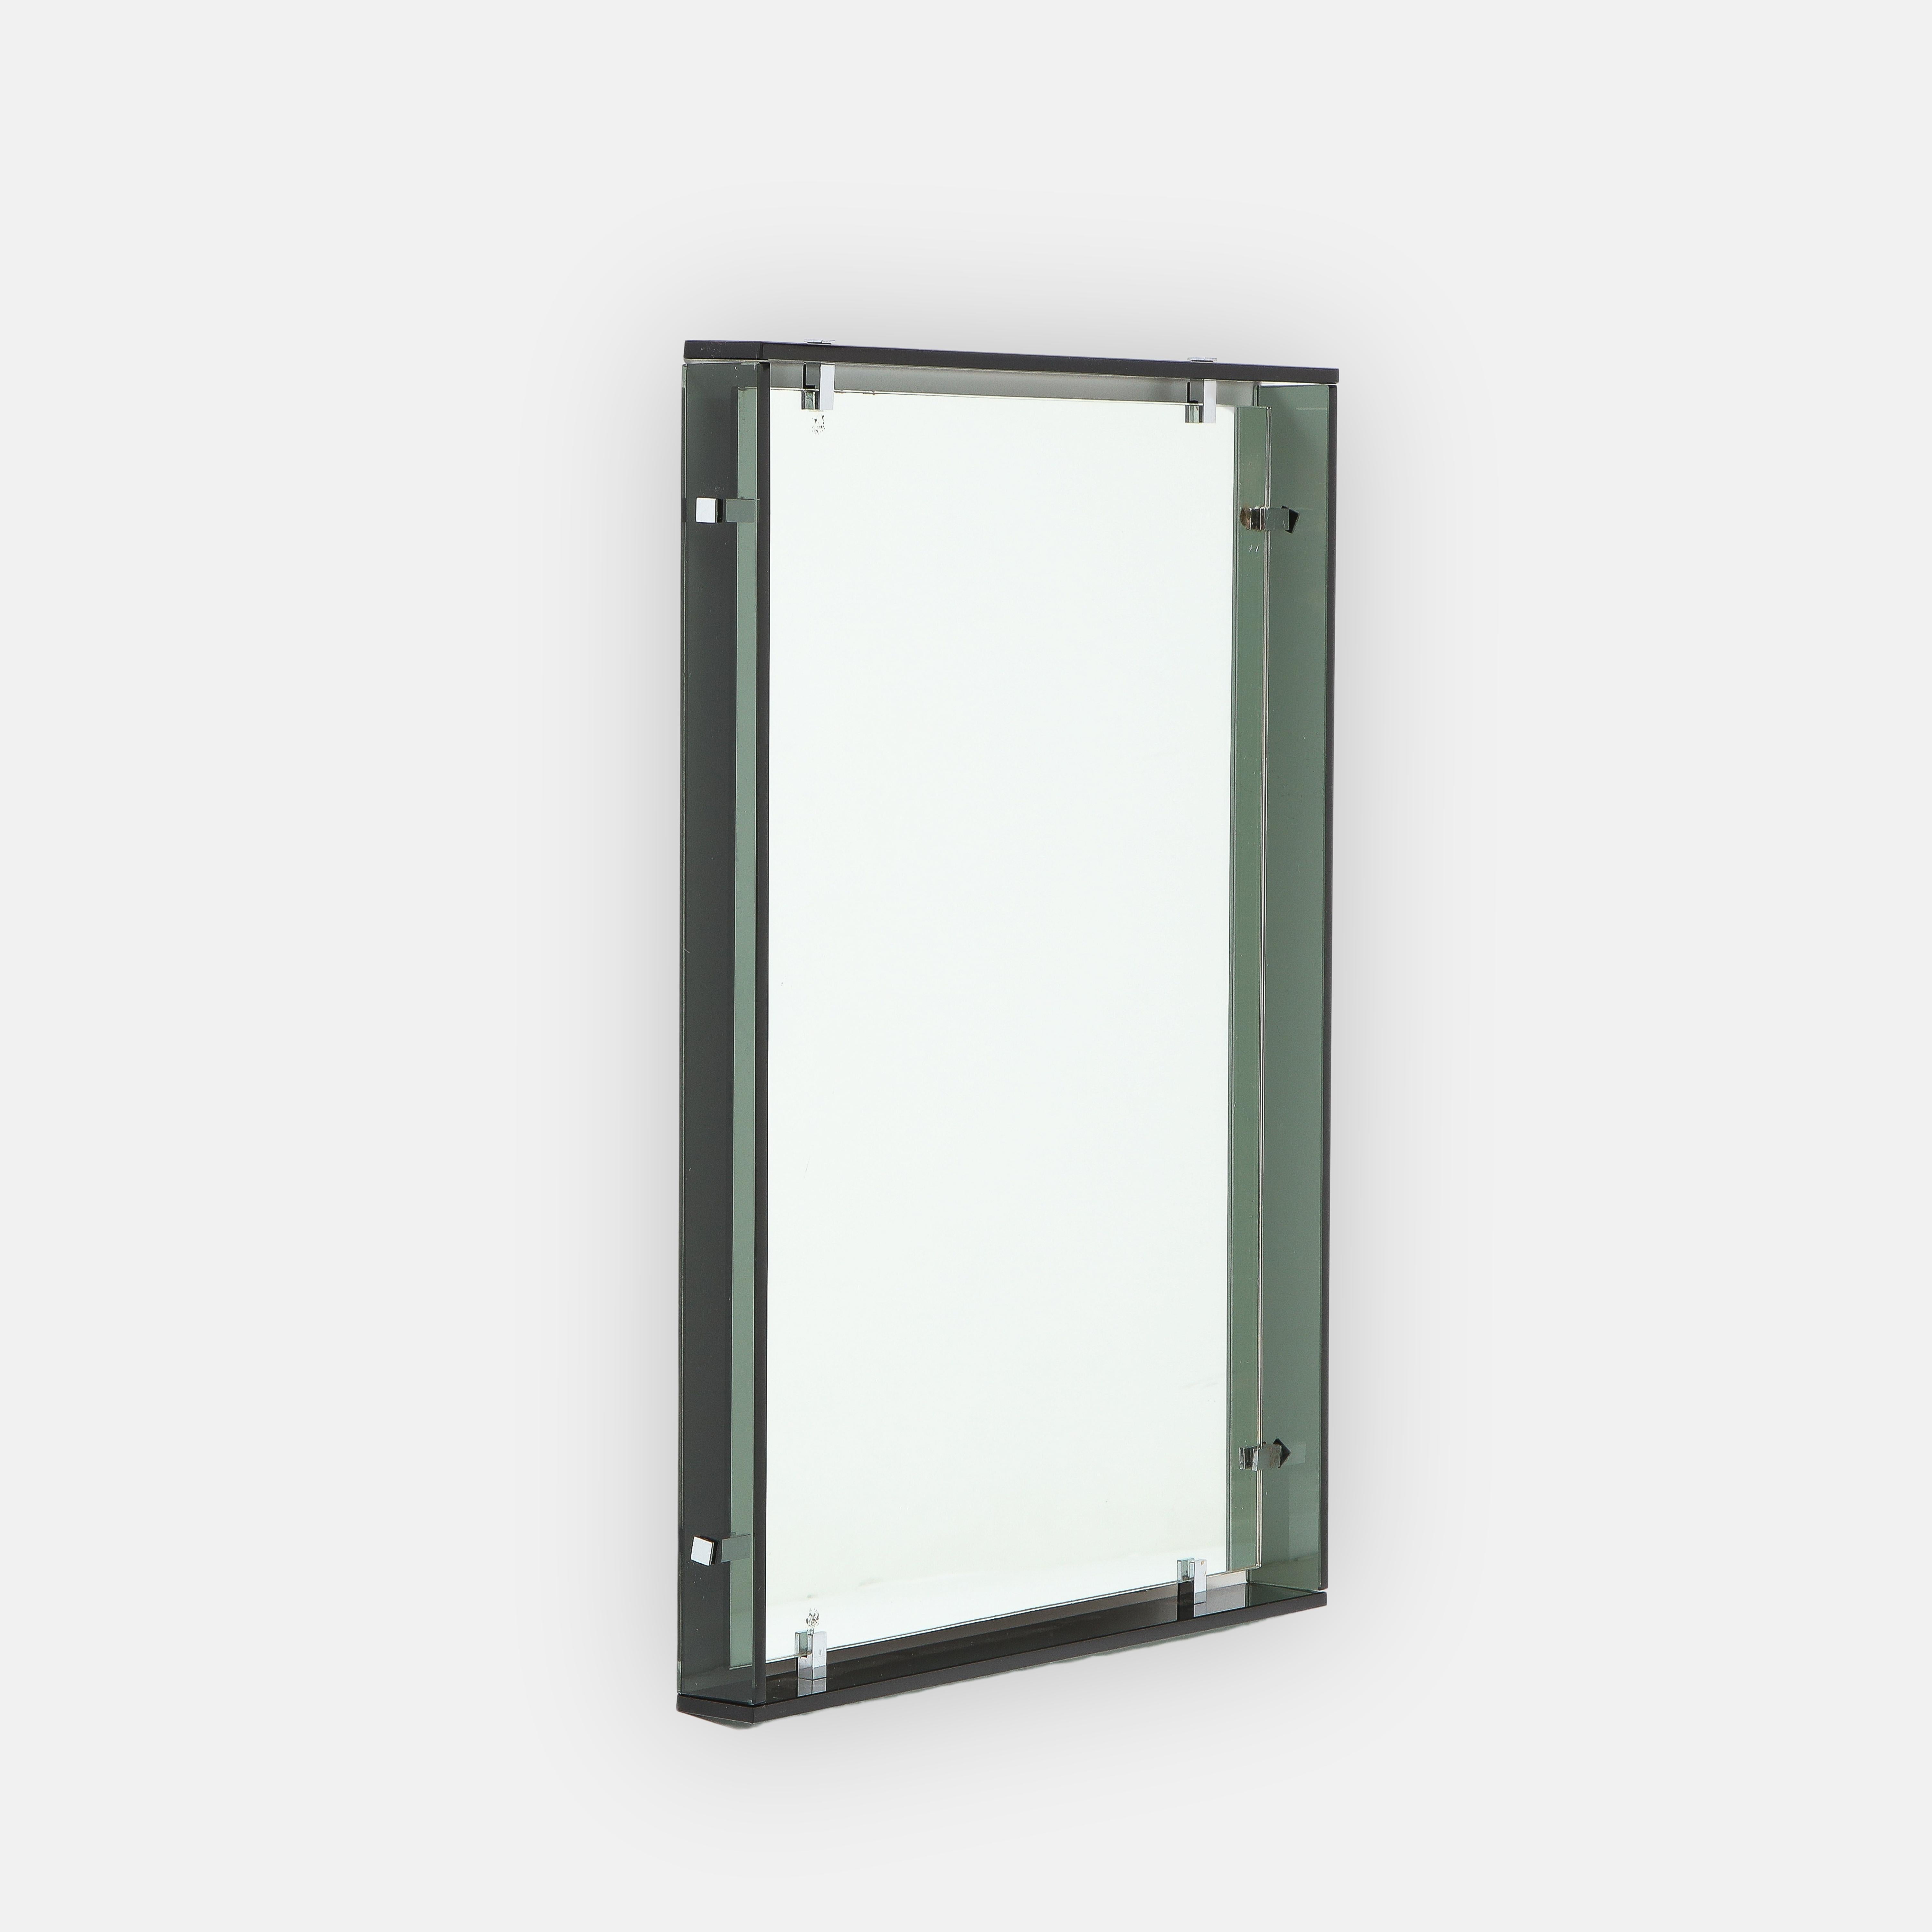 Max Ingrand for Fontana Arte rectangular mirror model 2014 consisting of thick dark gray/green colored strips of crystal glass surrounding original mirrored glass with nickel-plated brass clip supports, Italy, 1960s. This modernist and chic design